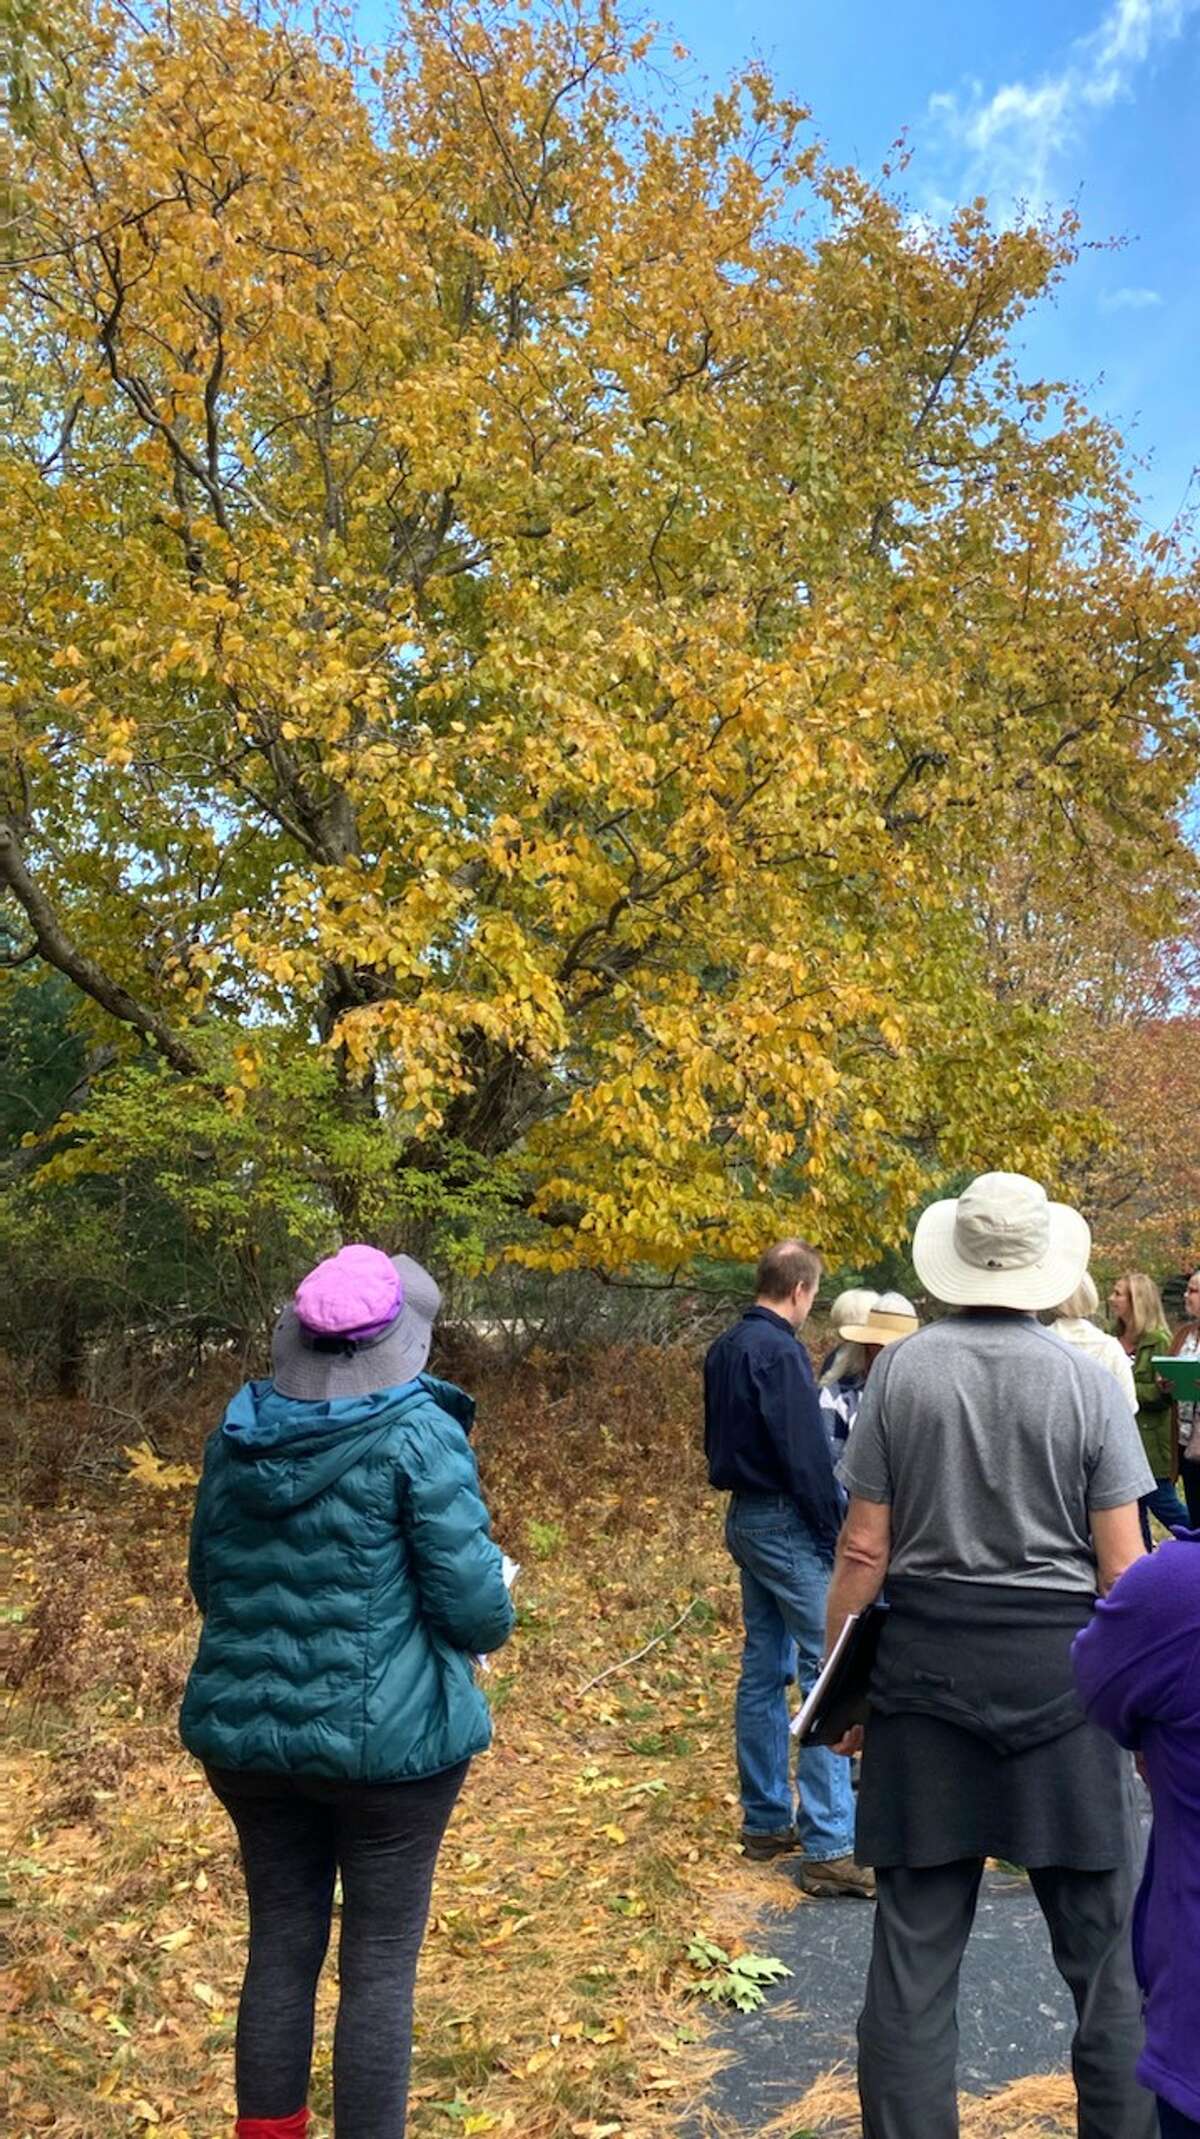 Joshua Shields (center, no hat) leading a nature discovery field trip with students on Oct. 21 at North Point Park.